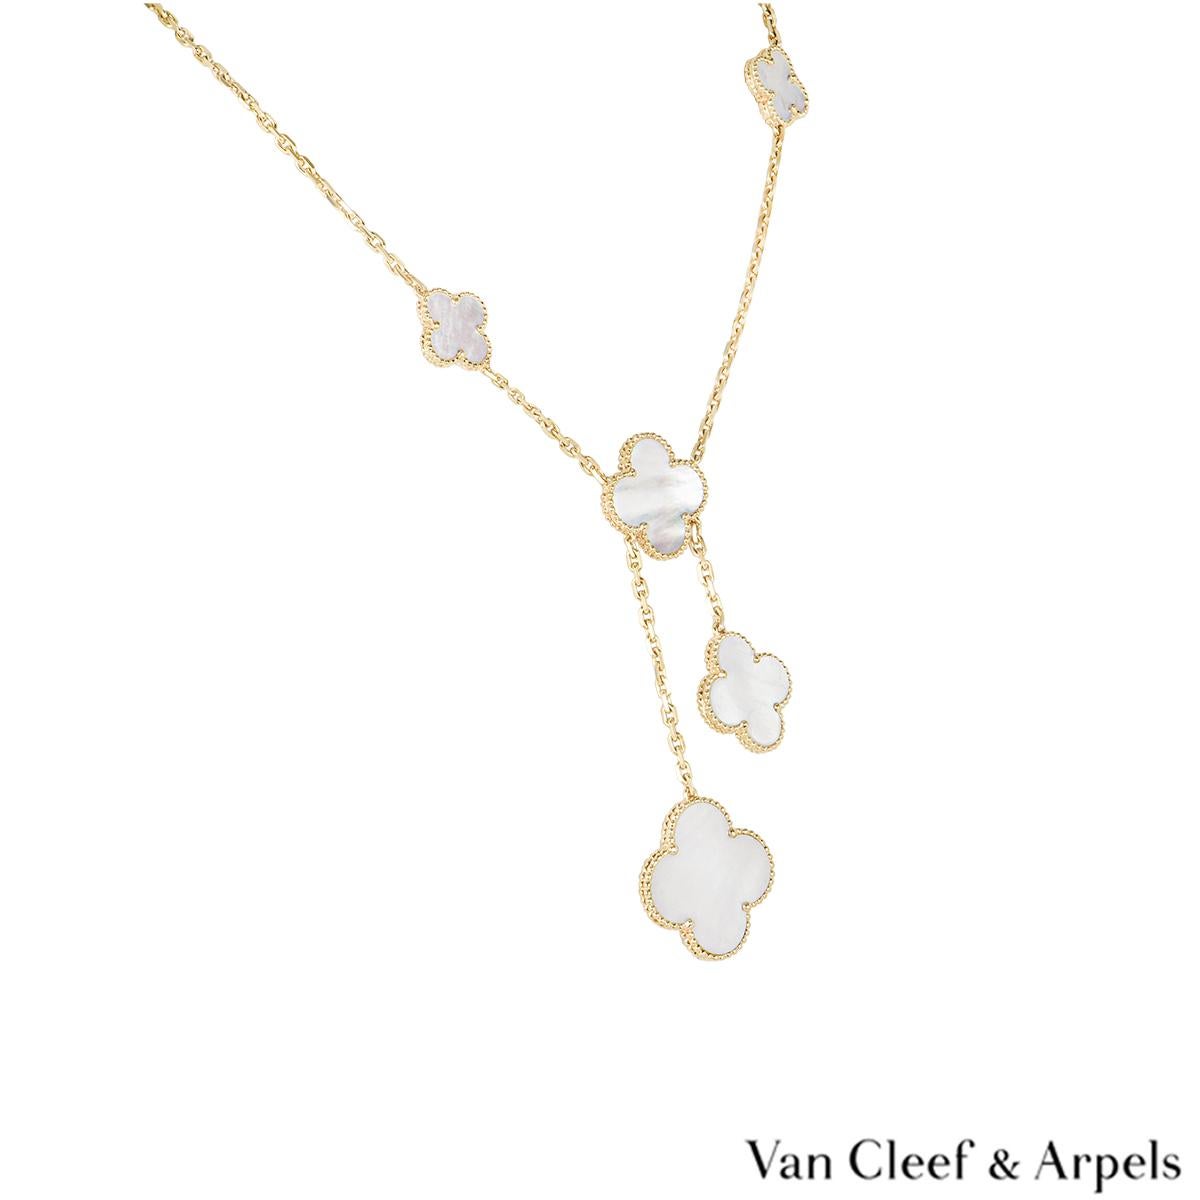 A luxurious 18k yellow gold mother of pearl necklace by Van Cleef & Arpels from the Magic Alhambra collection. The necklace features 6 four leaf clover motifs set to the centre with mother of pearl and complemented by a beaded outer edge. The